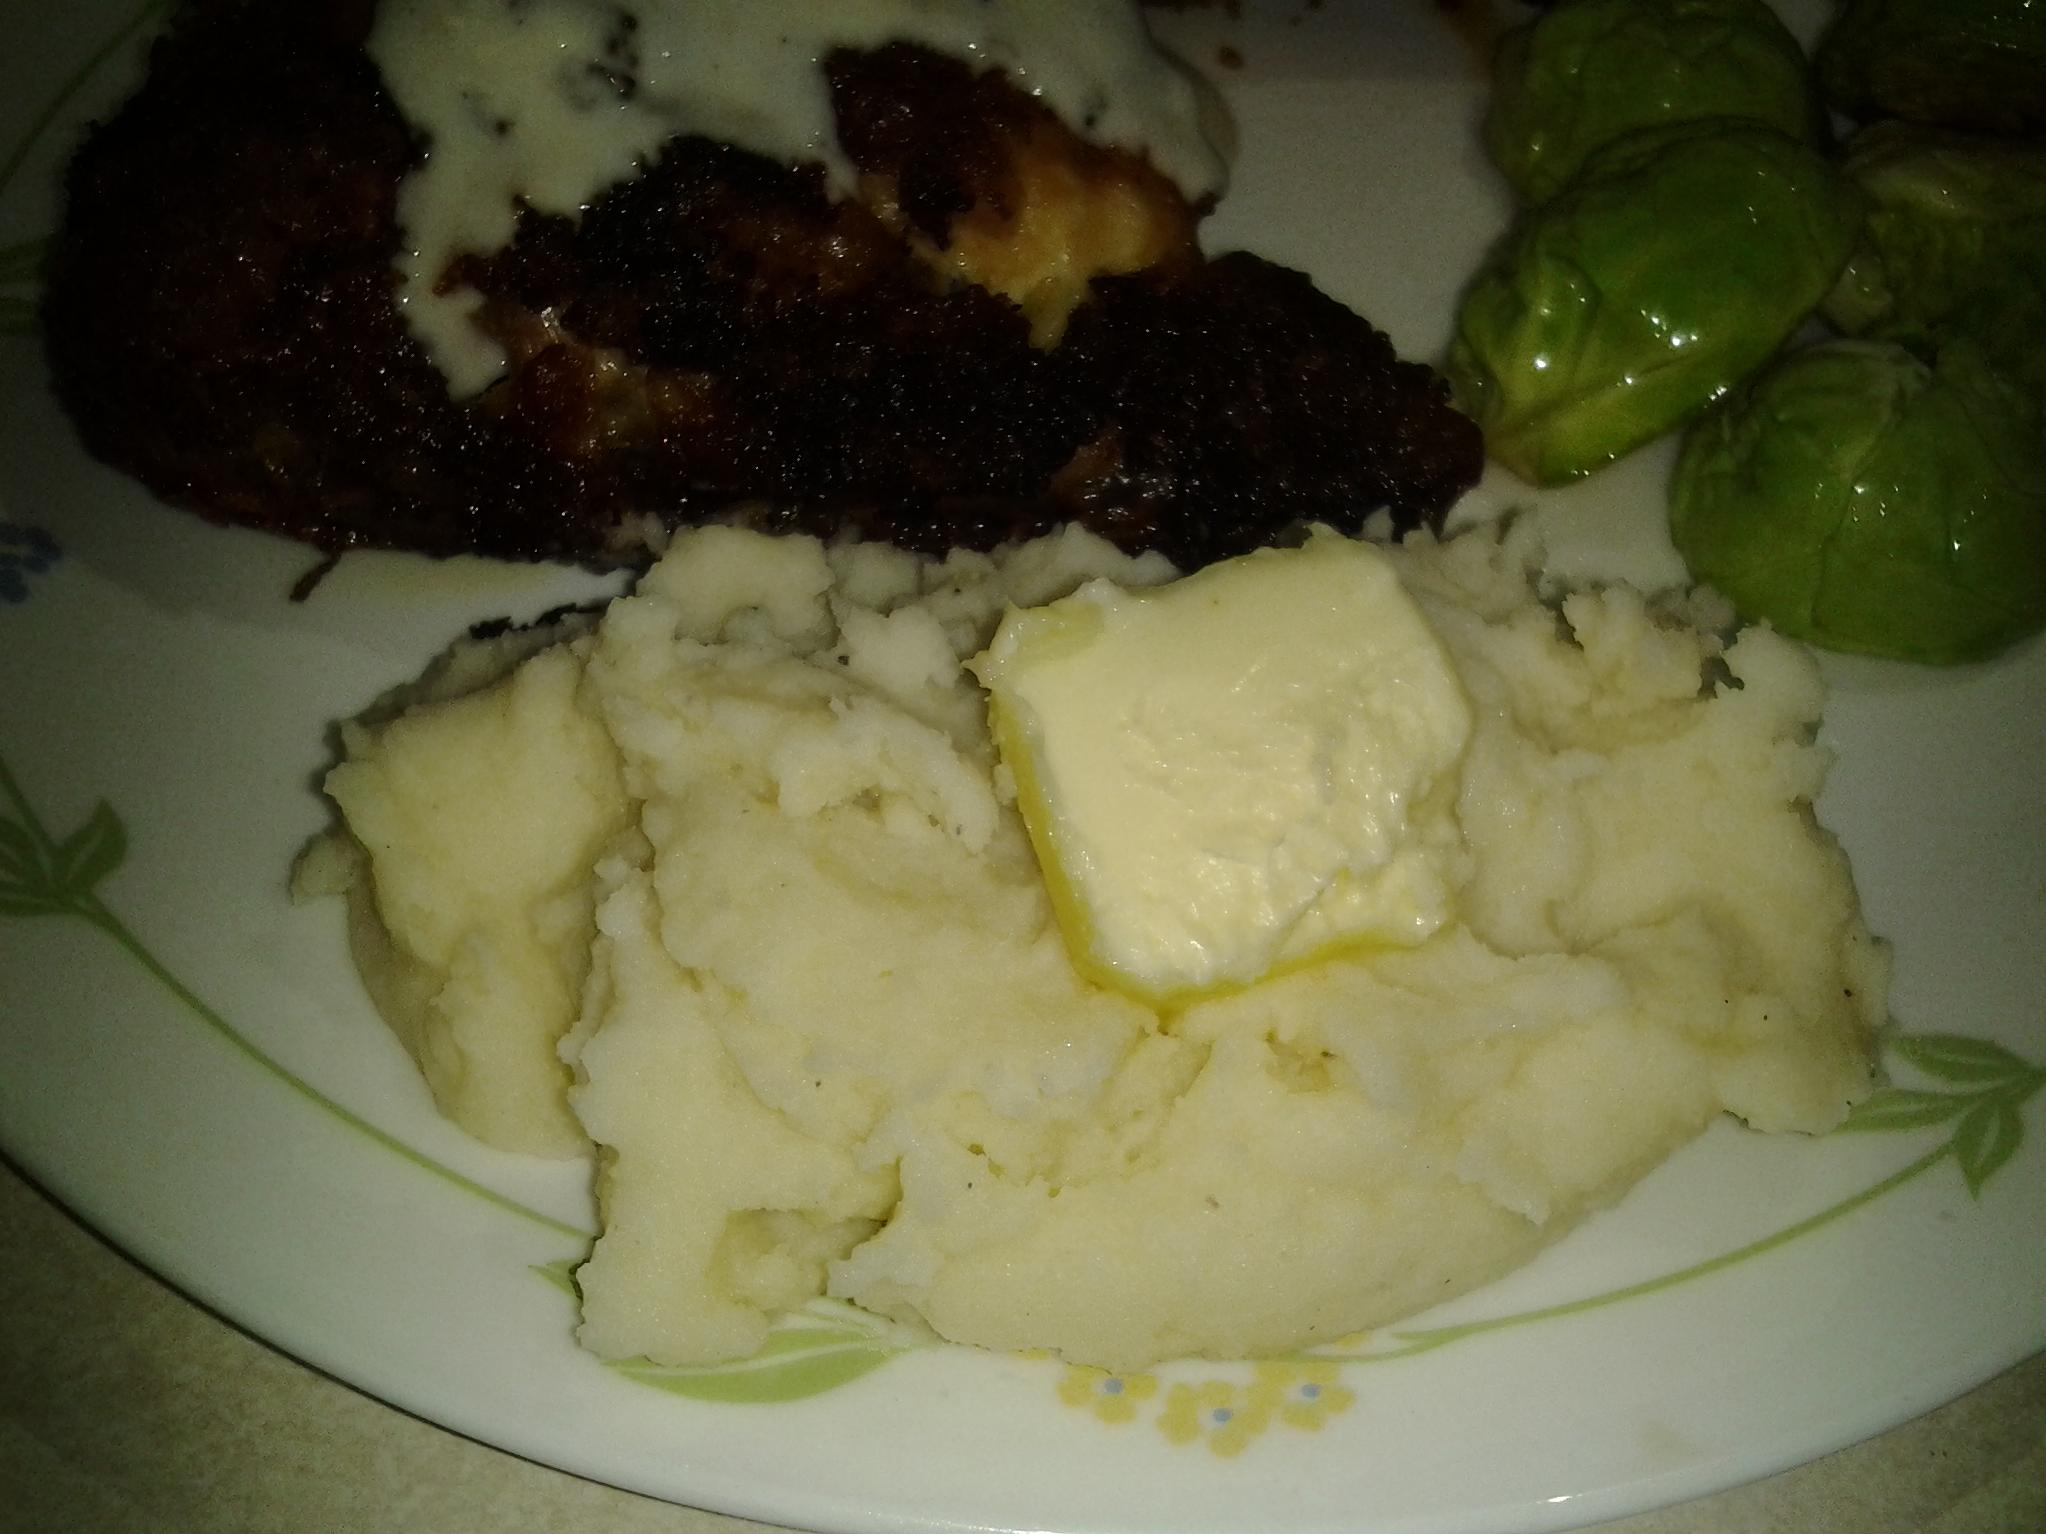  Creamy and rich mashed potatoes blended with tender cabbage — a perfect combination of flavors and textures.